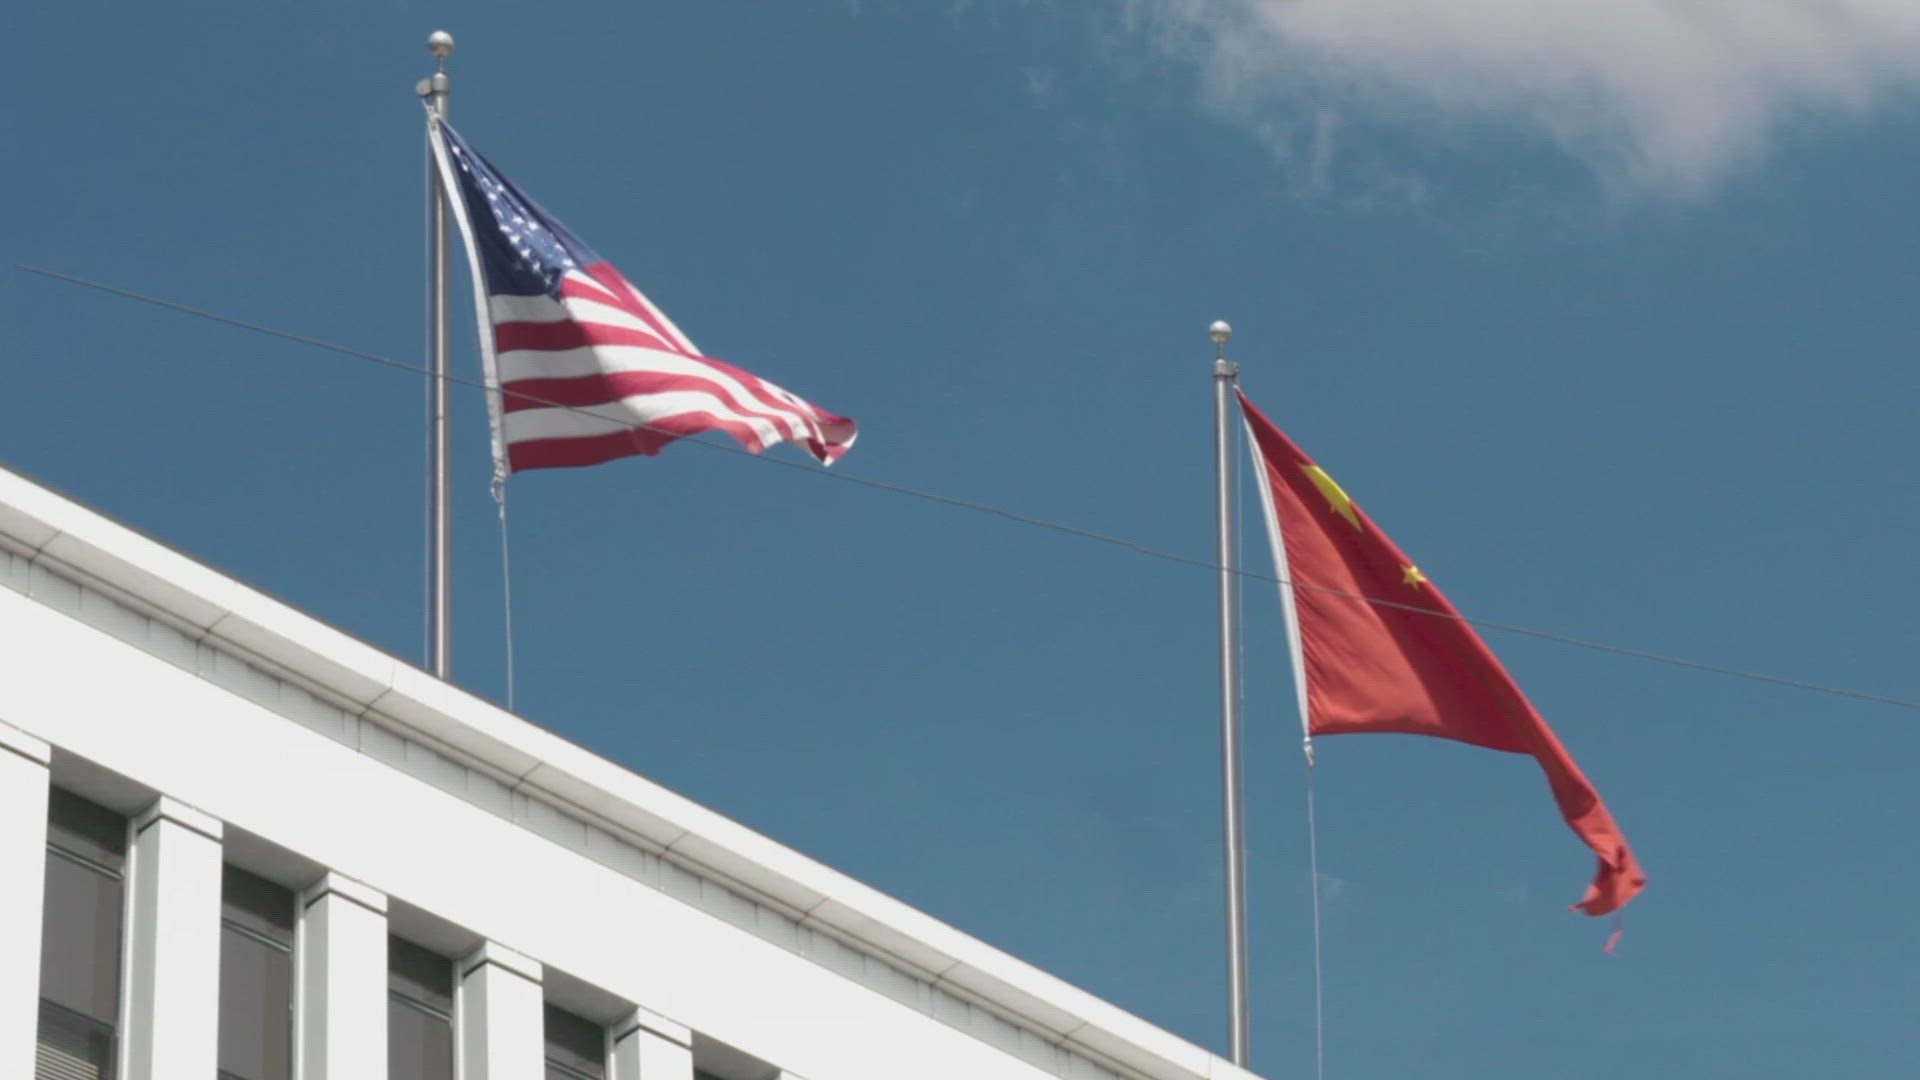 China is ramping up the attacks on American officials accusing the U.S. of 'malicious slander' after the Chinese consulate in Houston was ordered to close. Veuer's Nick Cardona has that story.